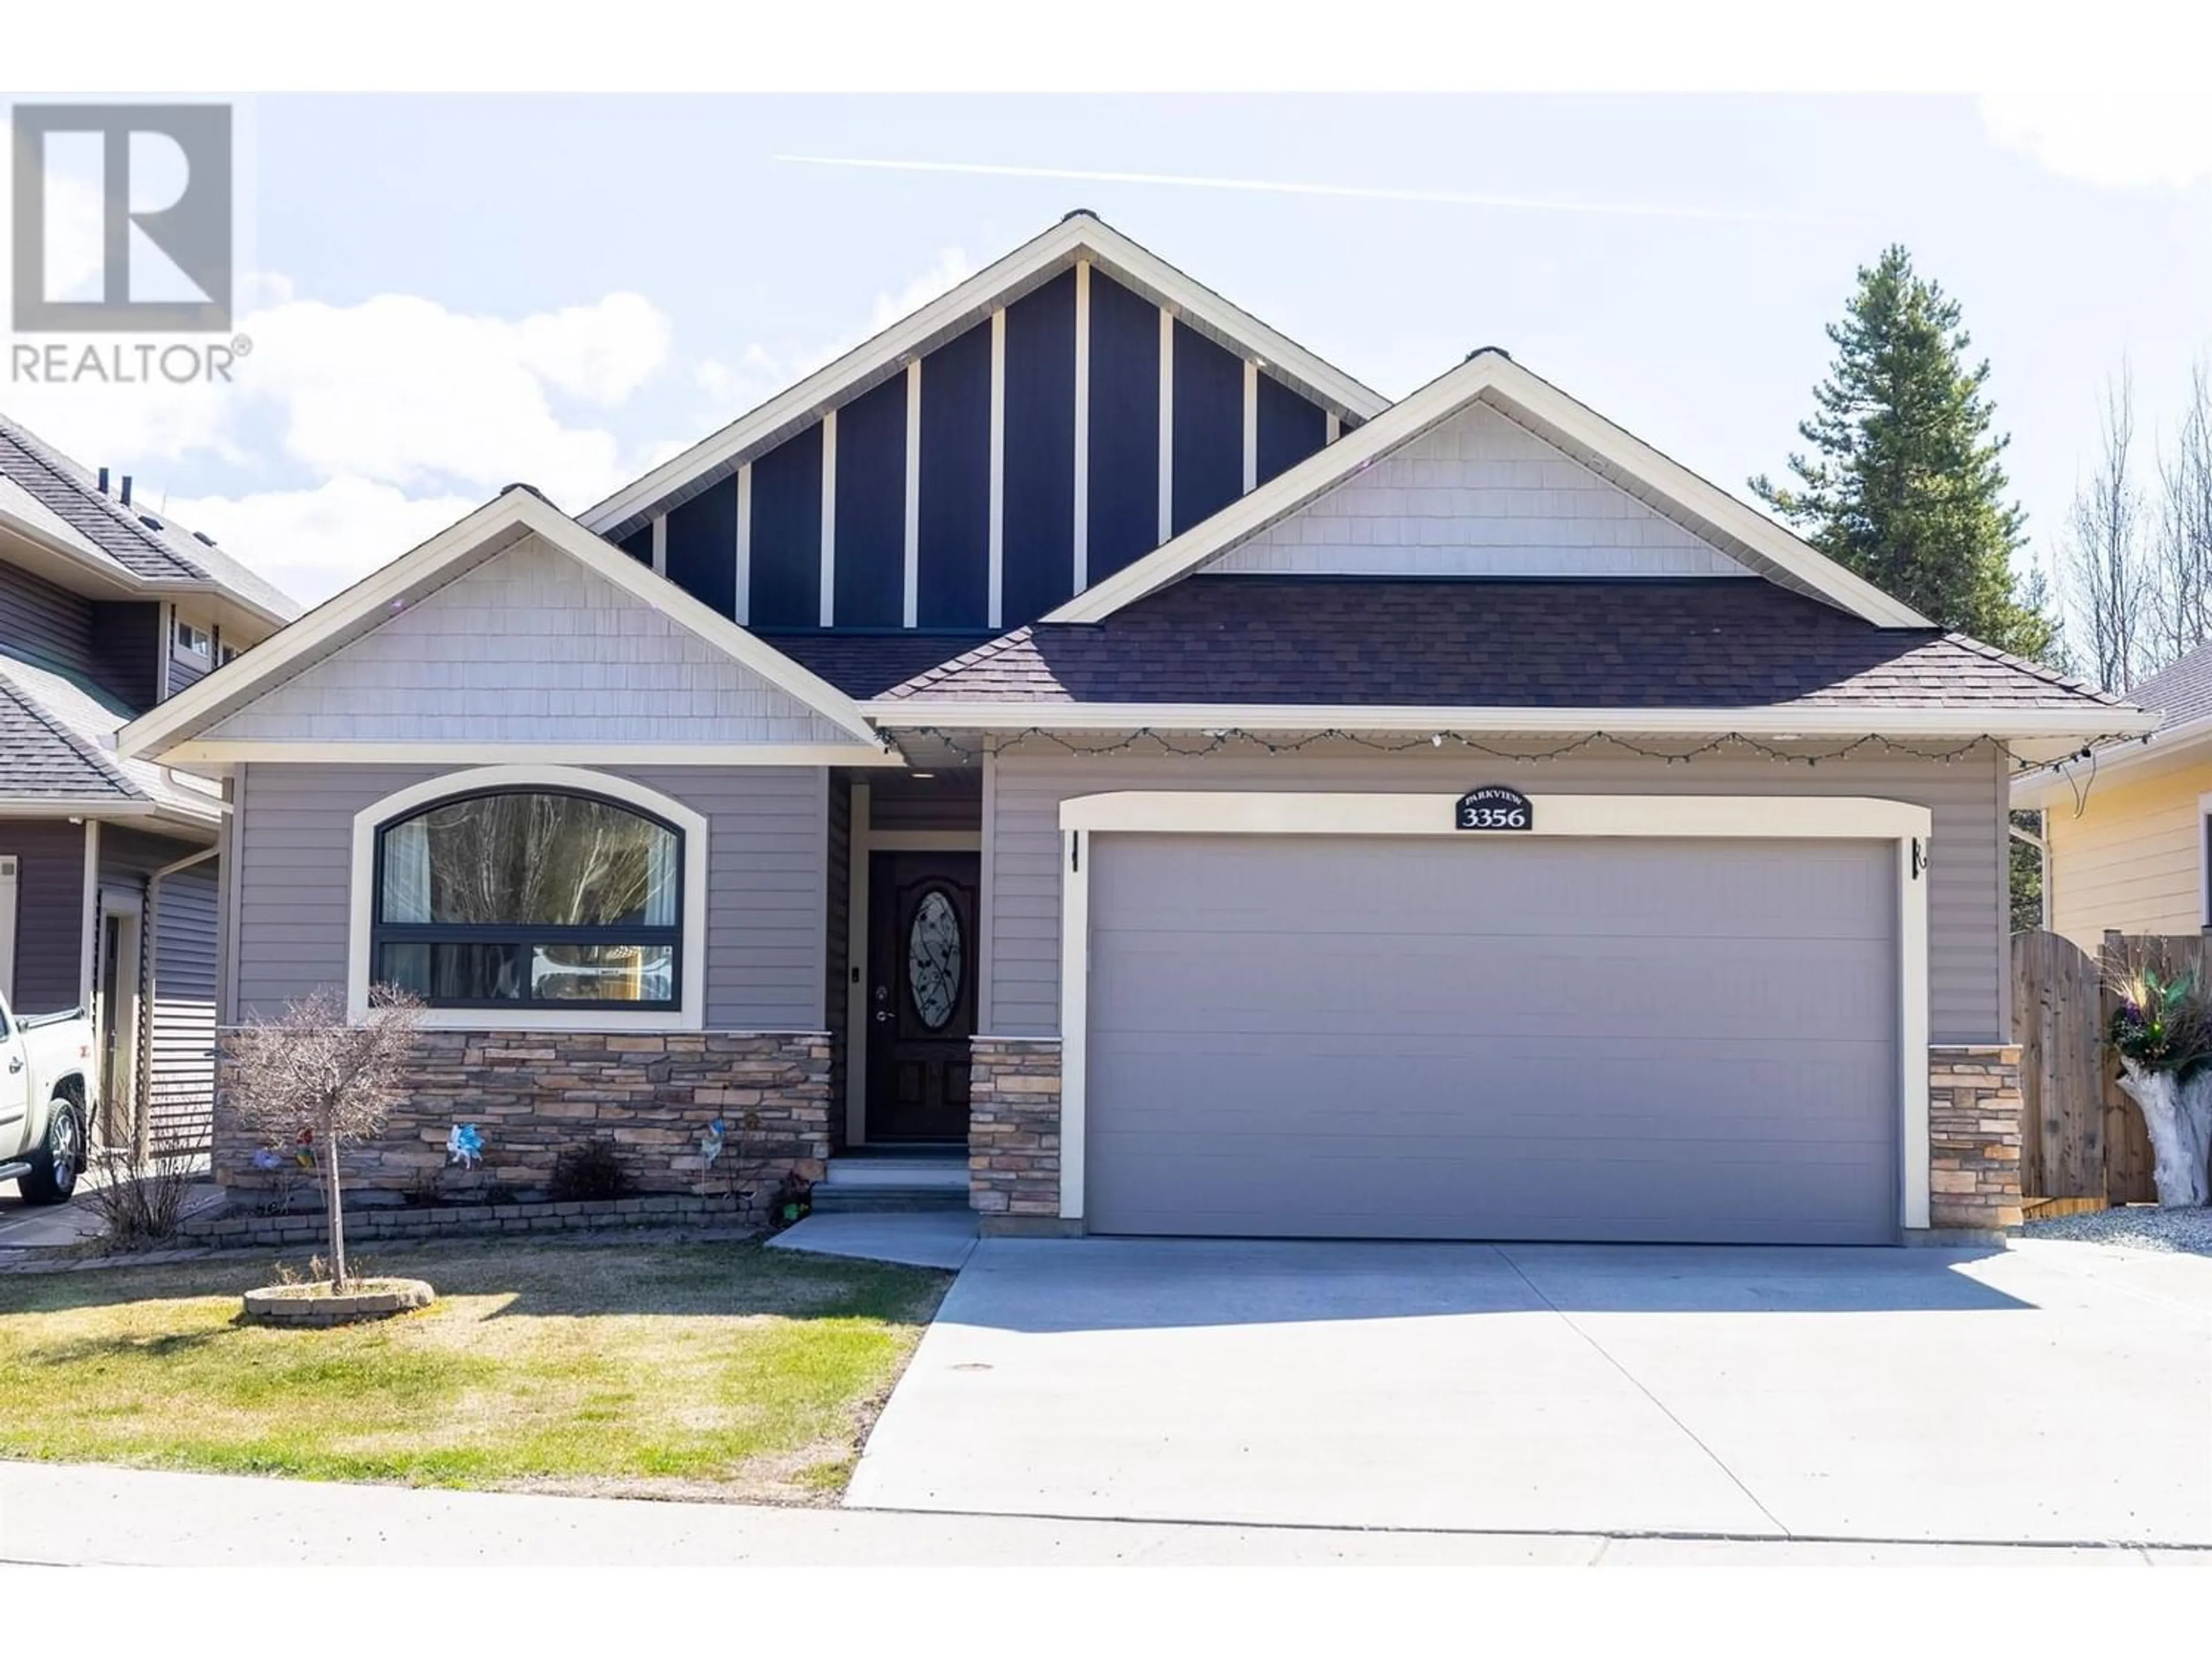 Home with vinyl exterior material for 3356 PARKVIEW CRESCENT, Prince George British Columbia V2N0E7